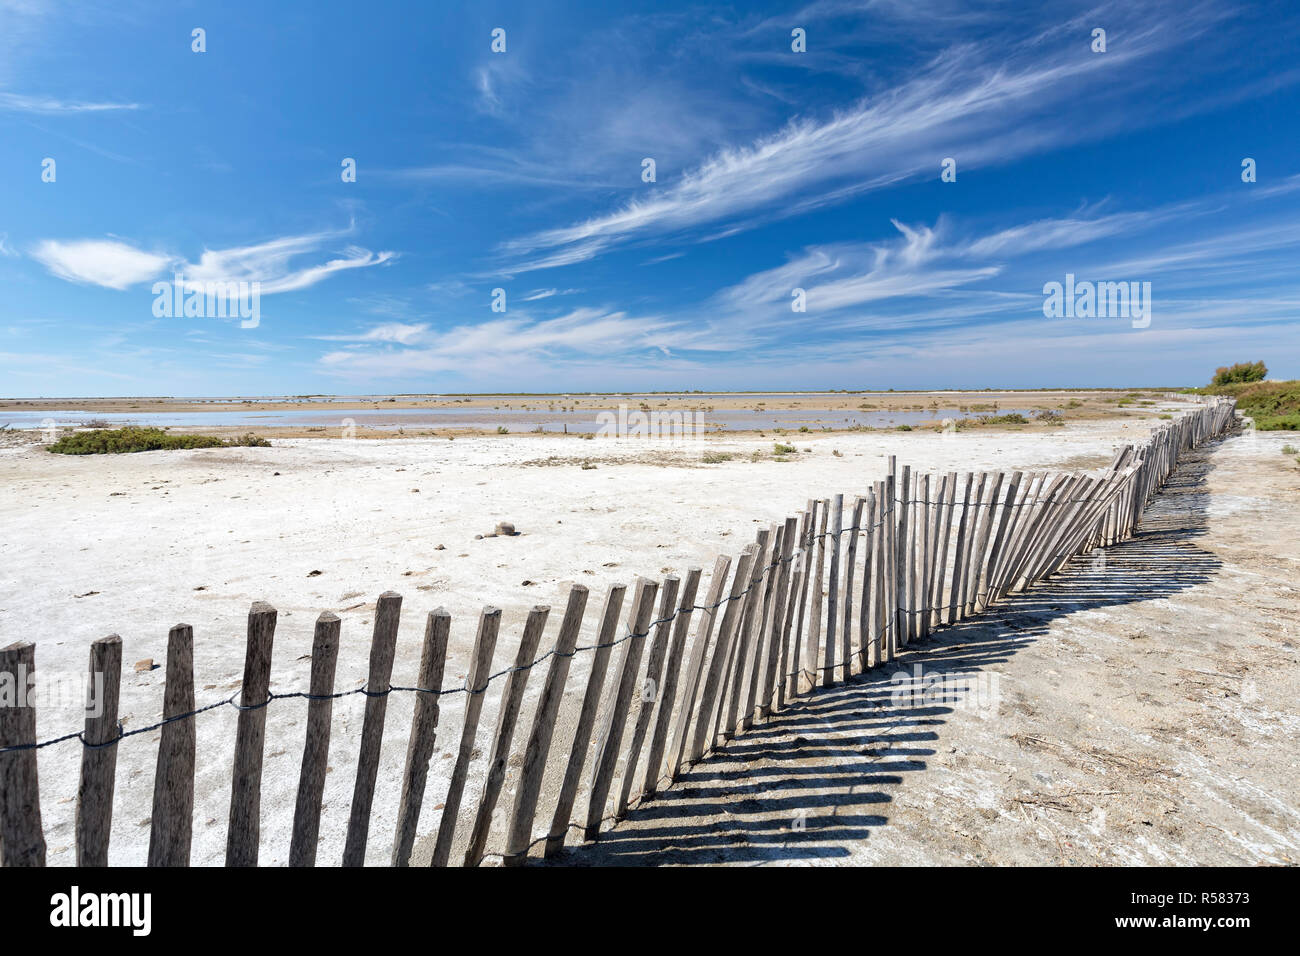 typical landscape in the southern camargue,southern france Stock Photo